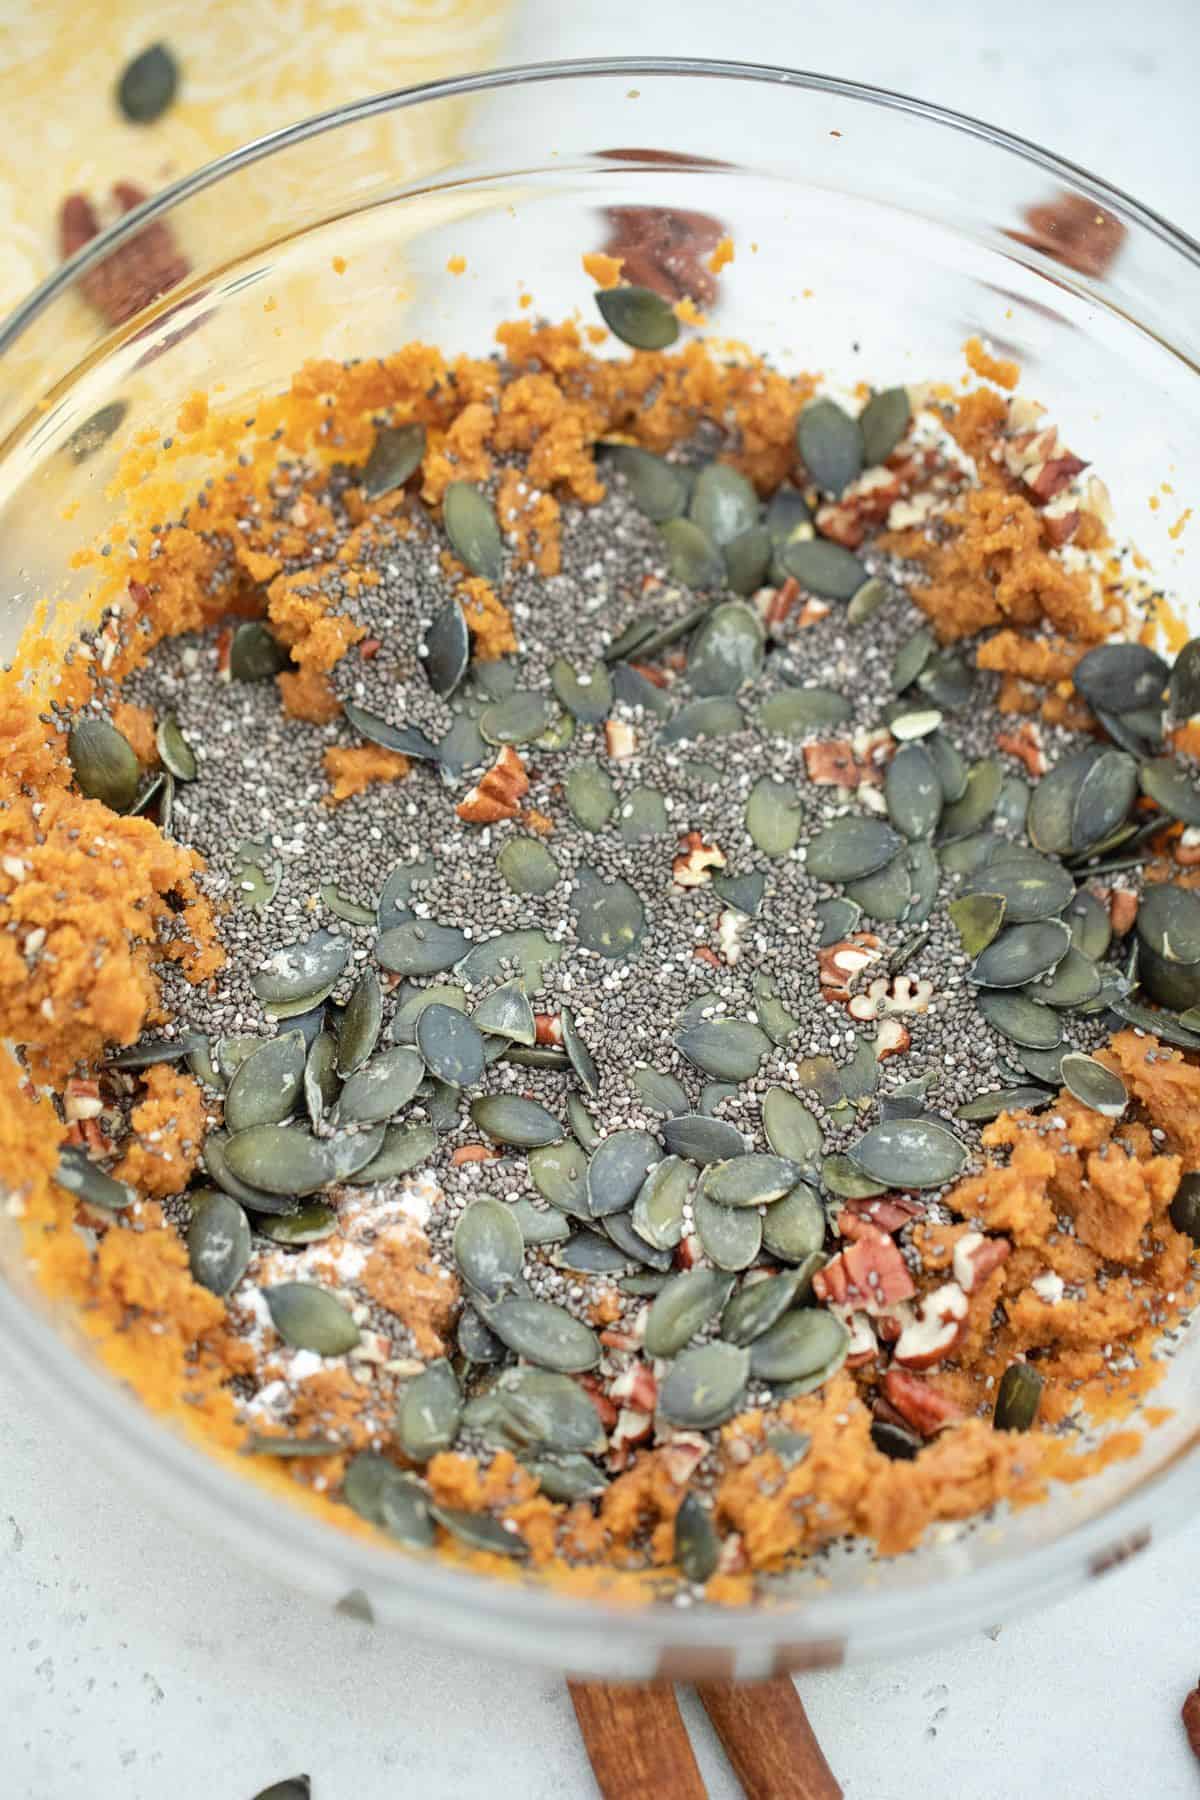 Pumpkin and chia seeds added to bowl.